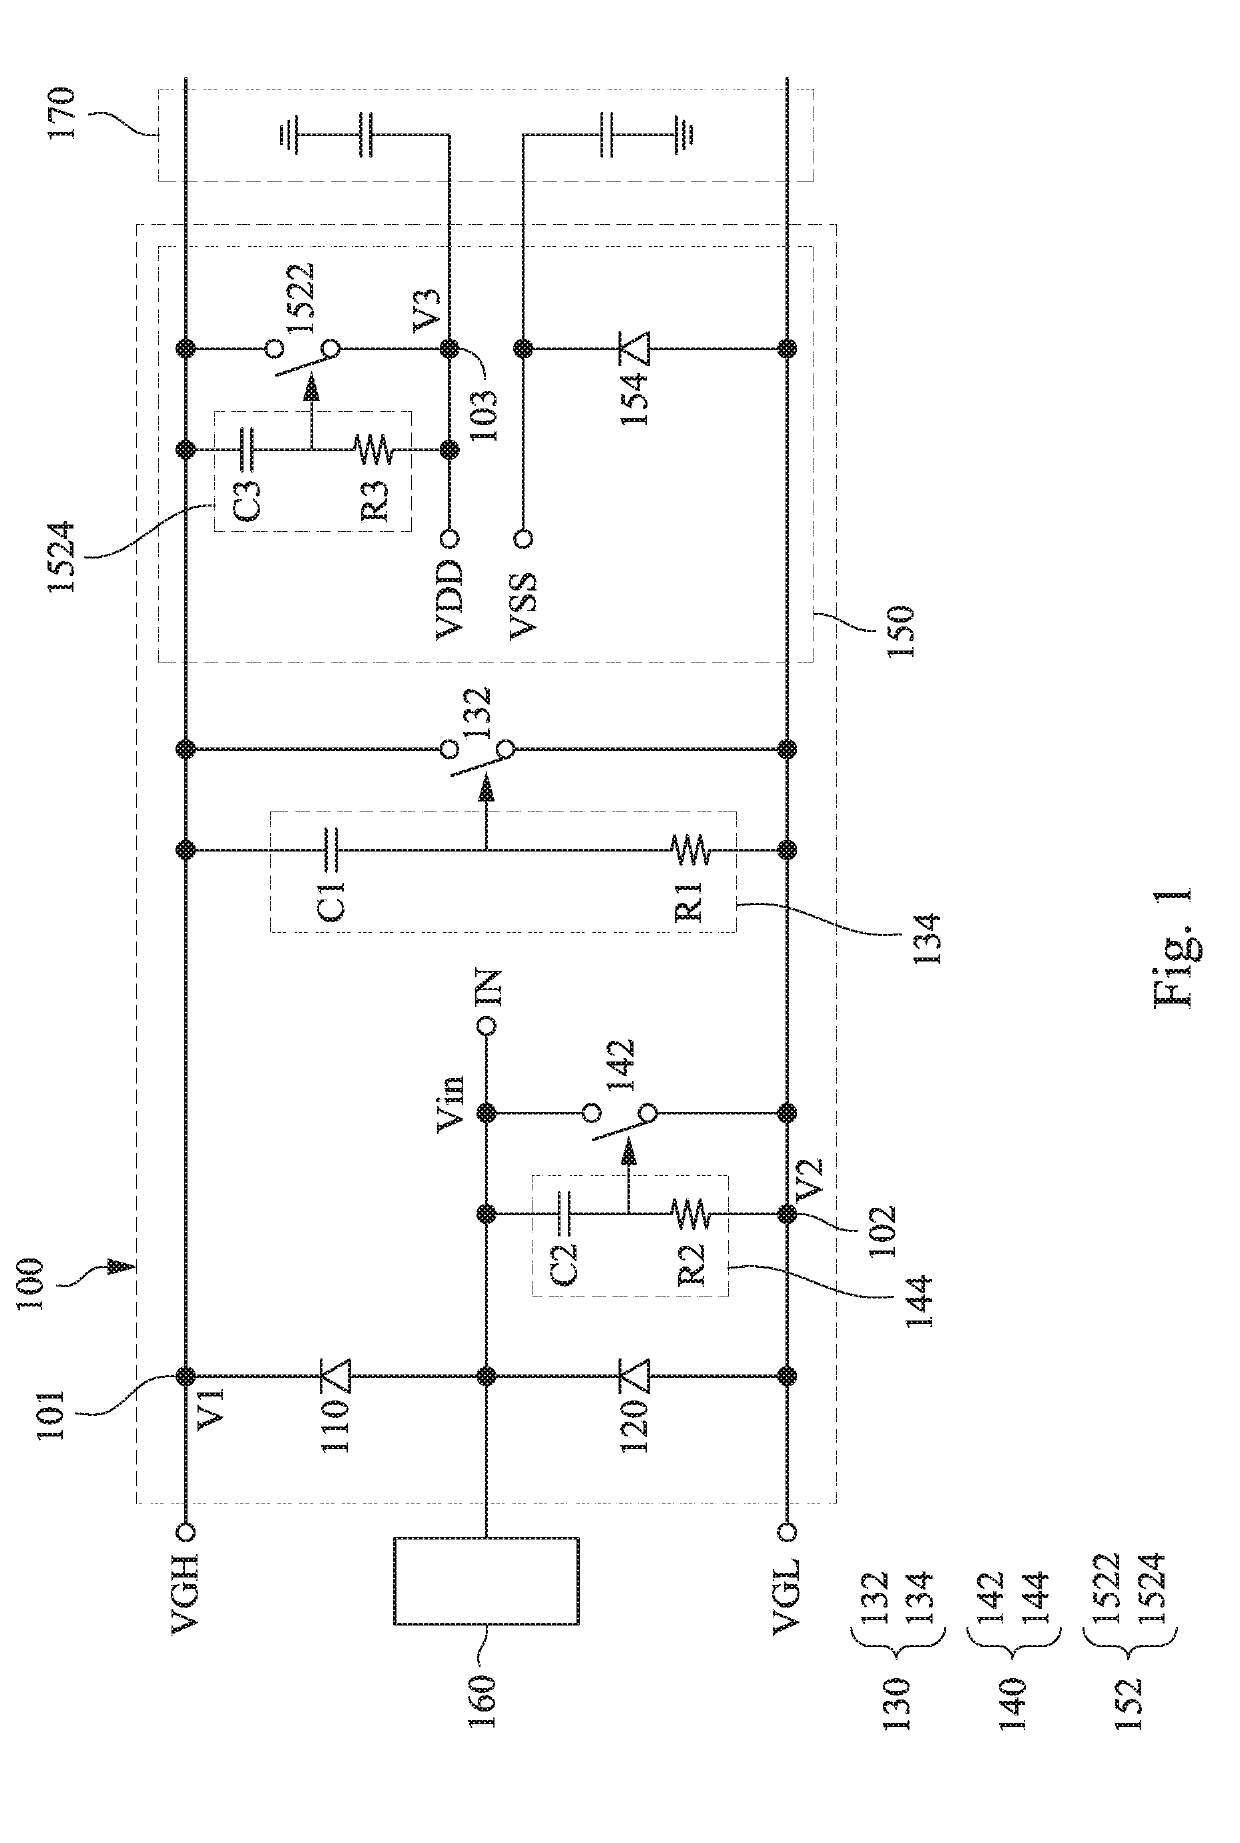 ESD protection circuit, related display panel with protection against ESD, and ESD protection structure